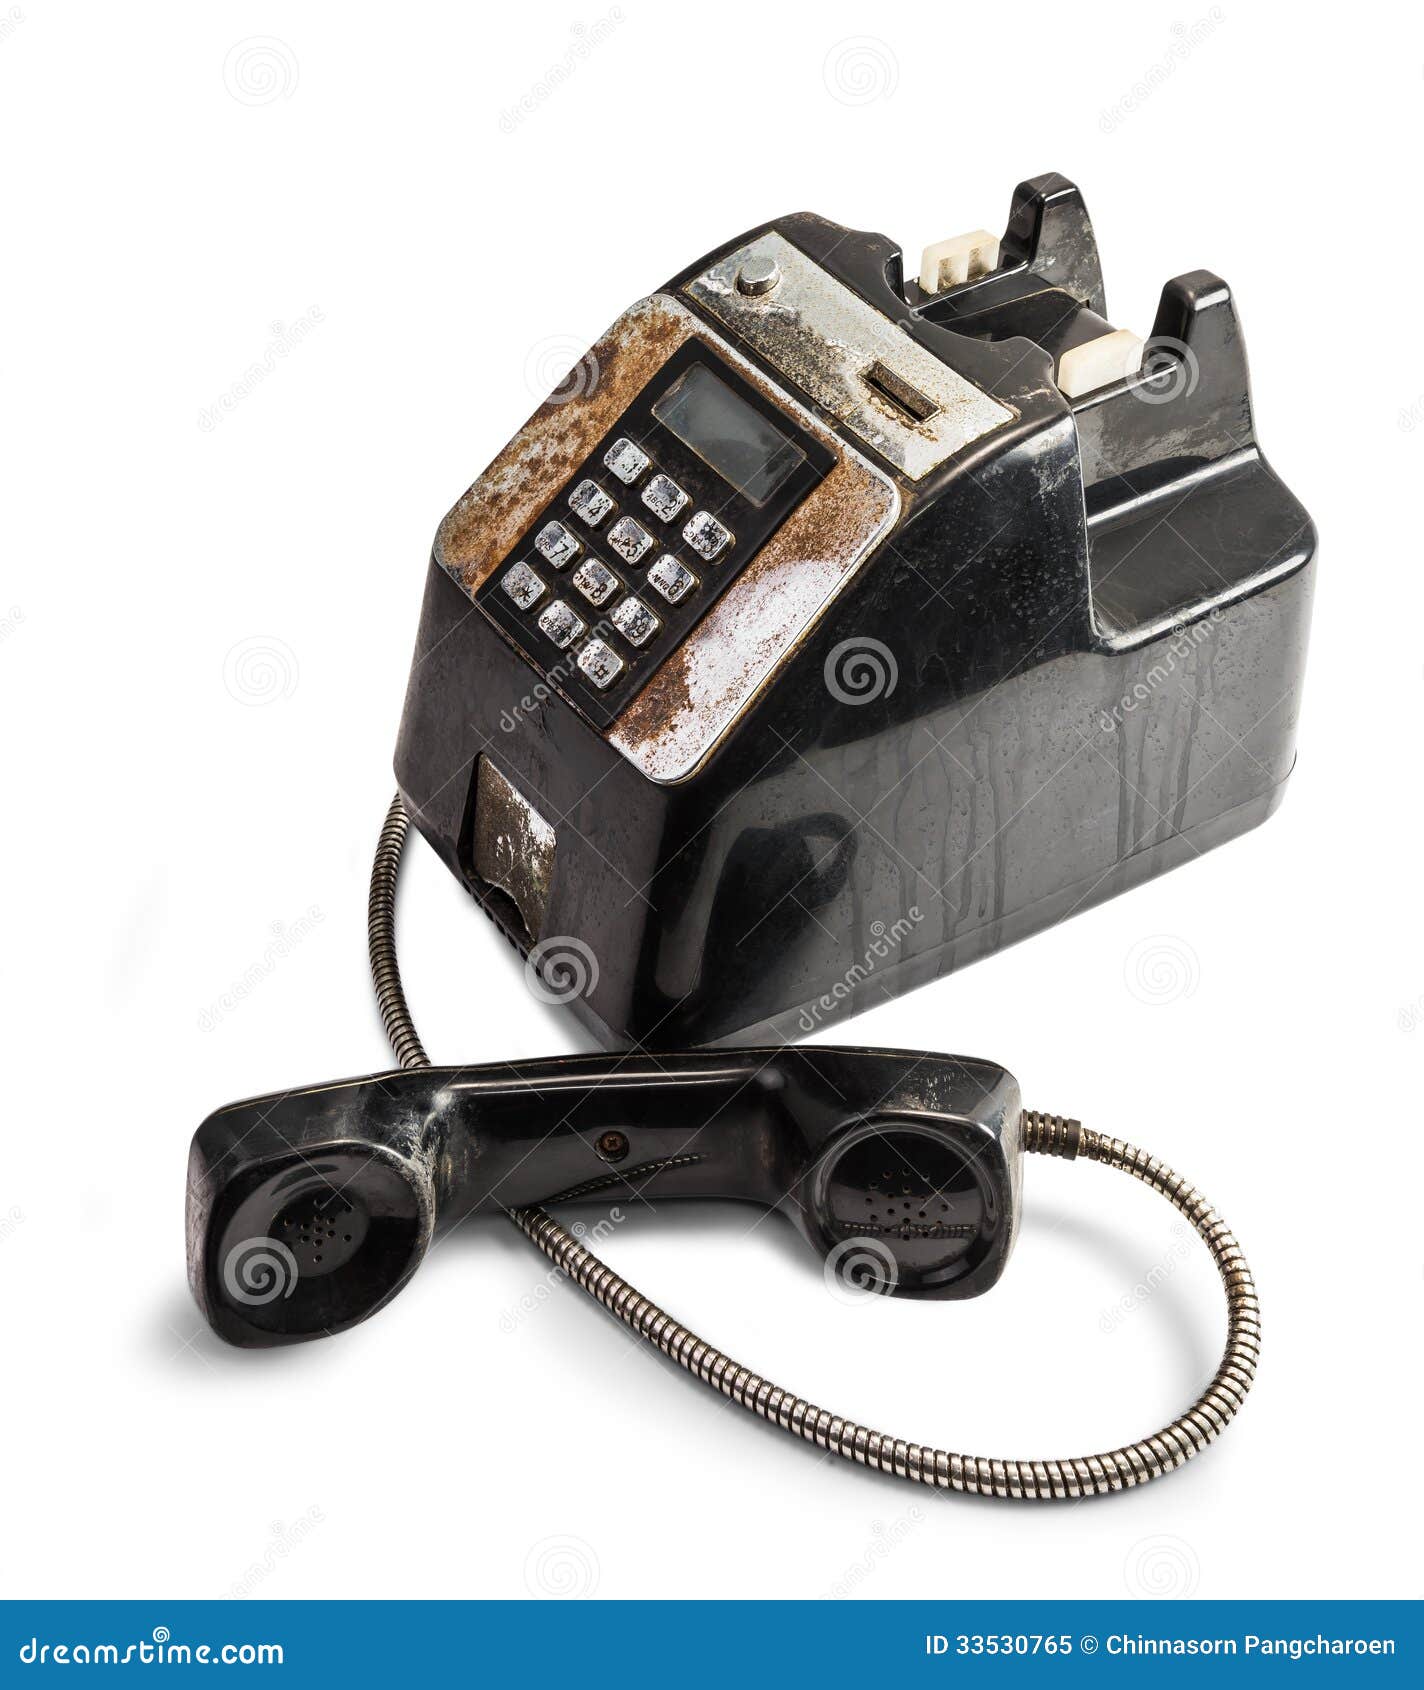 shabby outdated telephone